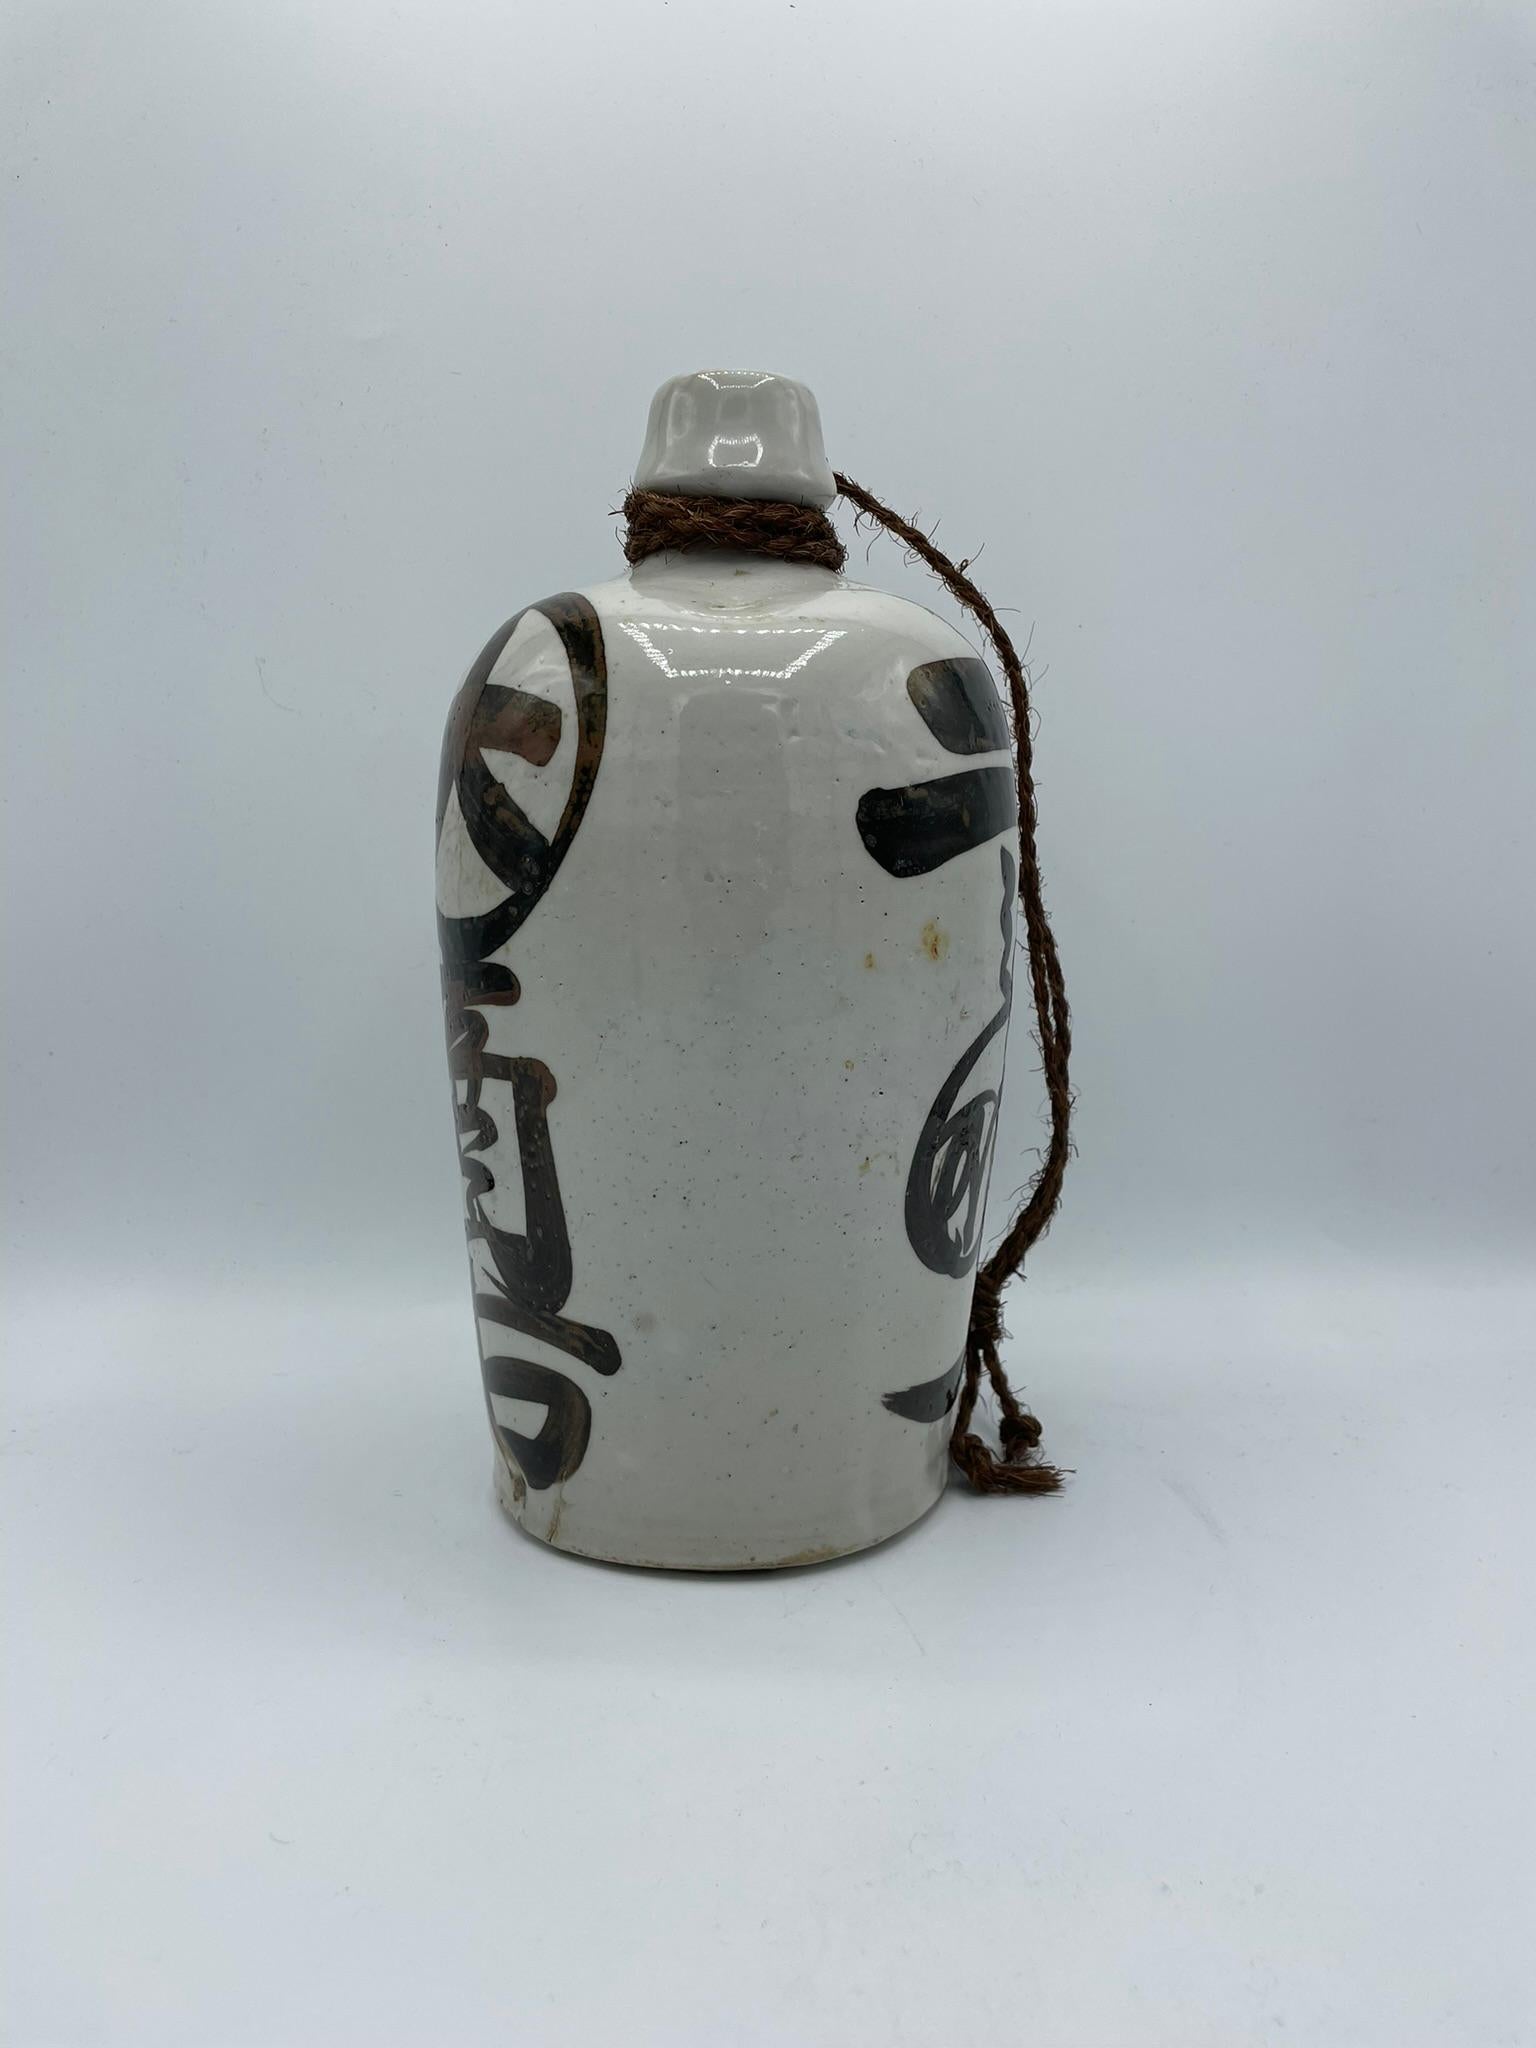 This is a Japanese sake bottle called 'Kayoi Tokkuri'.
This can be used as a flower vase, home decoration or a bottle for sake.
It's a vintage item which made around 1940-1970s in Japan.
The surface of this bottle, there are Hand-written kanji